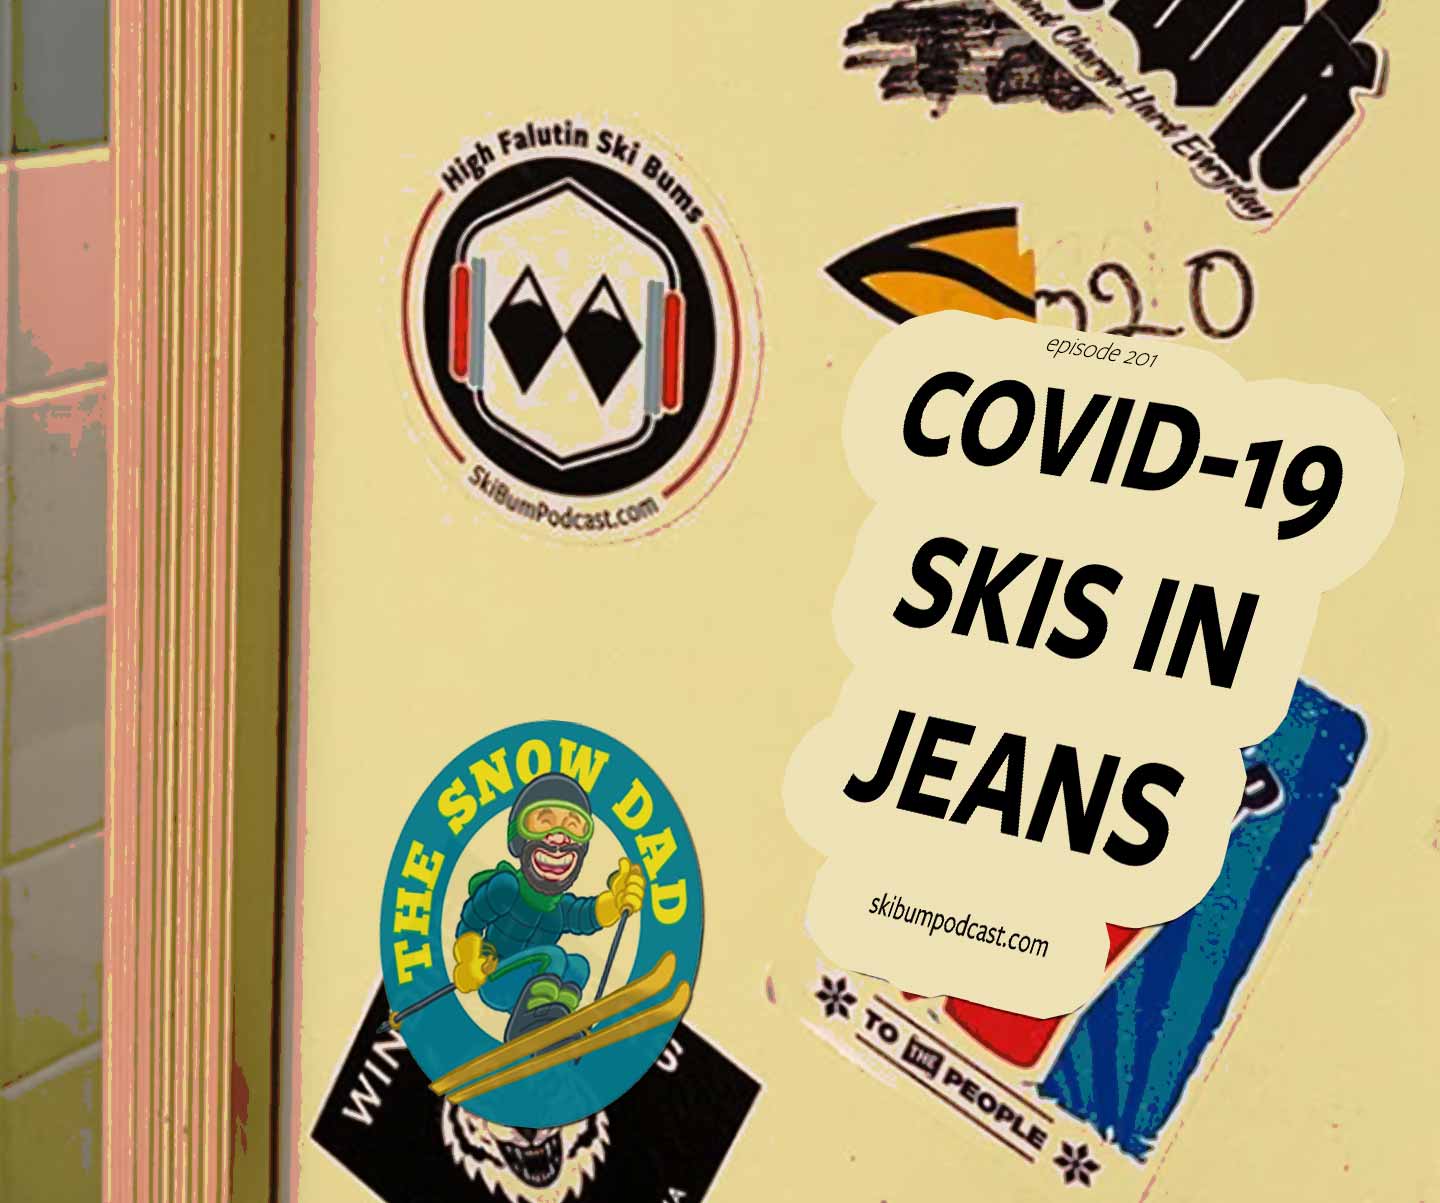 Podcast #201 – Covid-19 Skis in Jeans